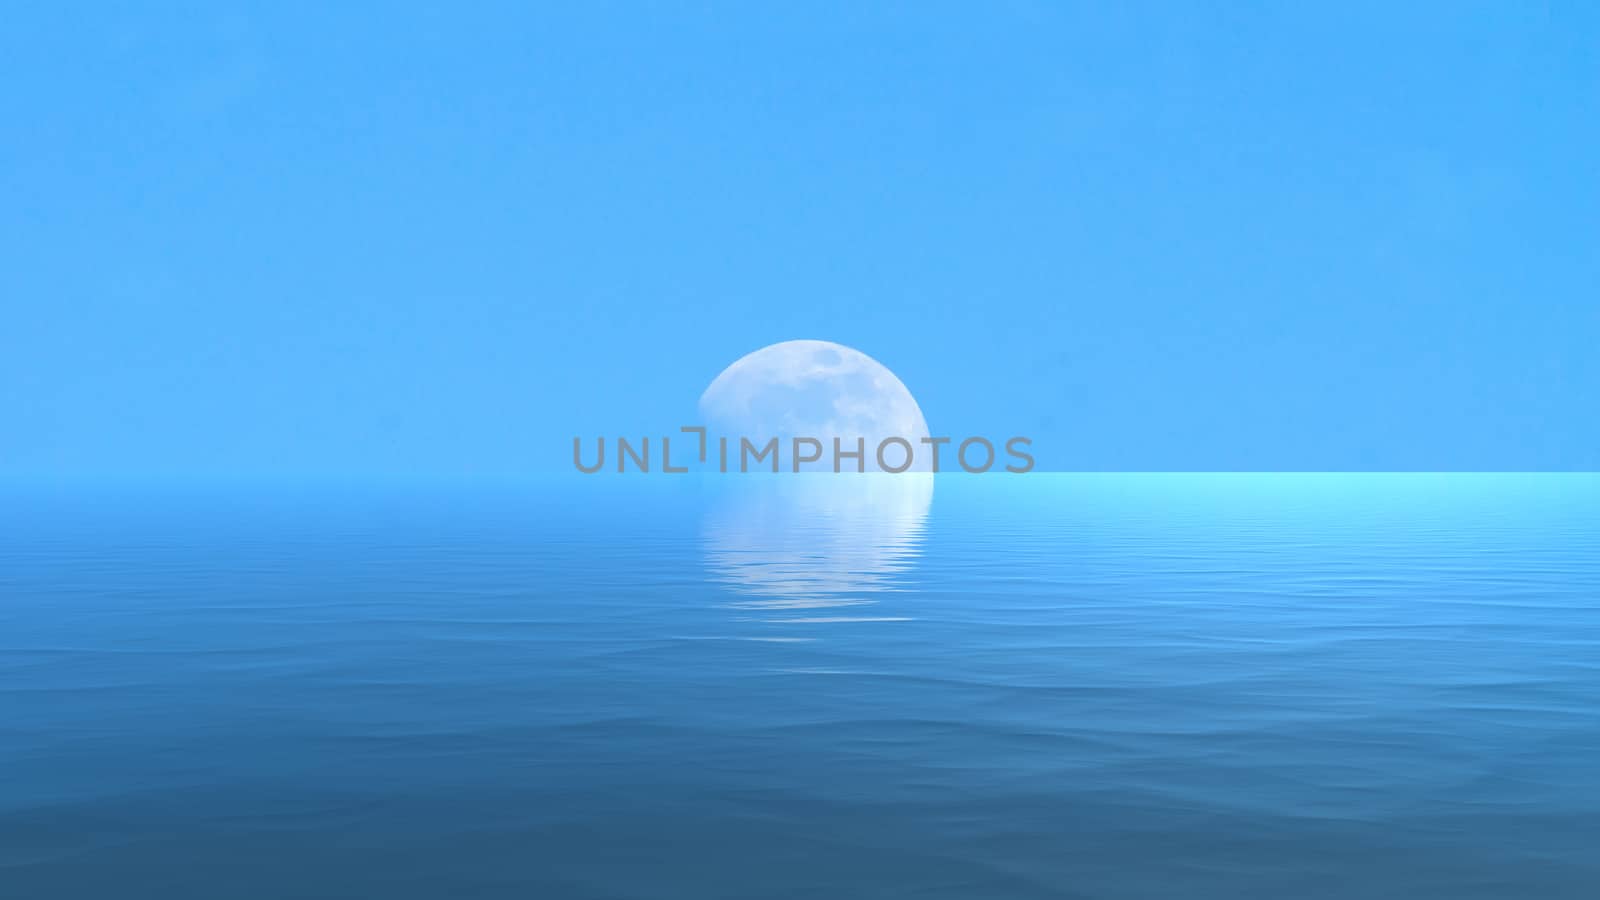 Moon over the blue wide sea by Fr@nk